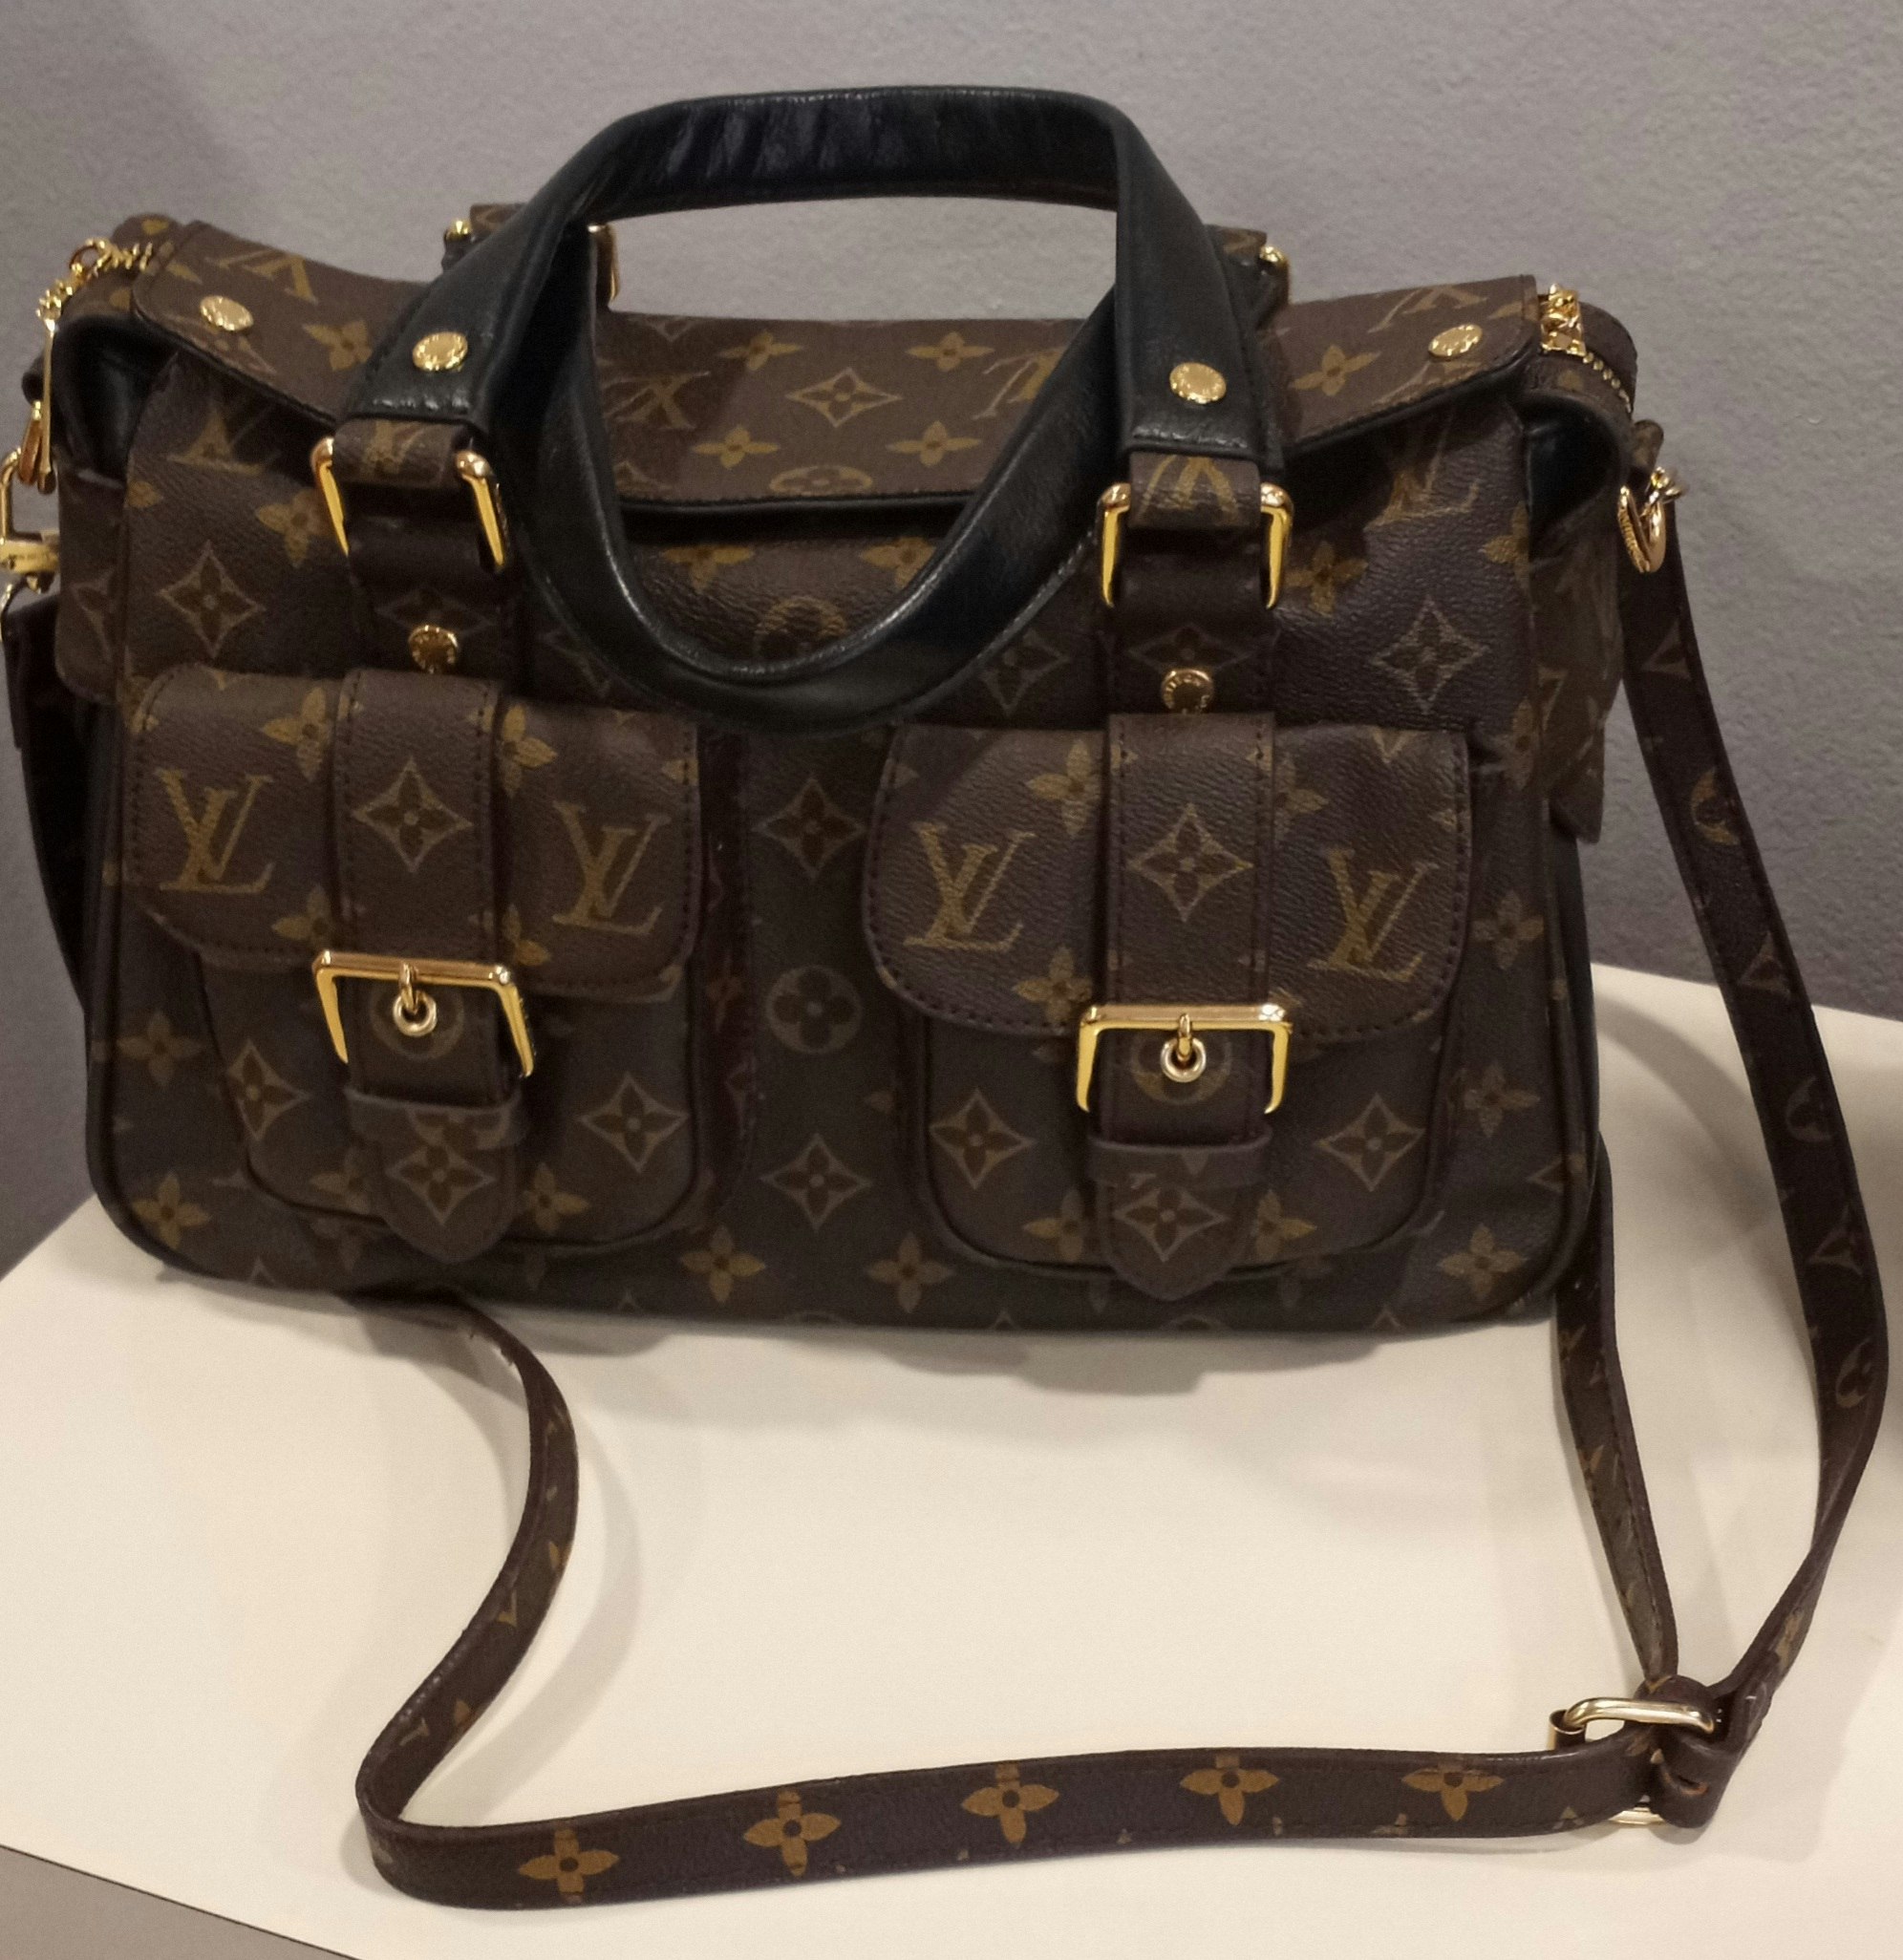 LV Handbag - iLeen Shop: New and Used Clothes & Apparels and other